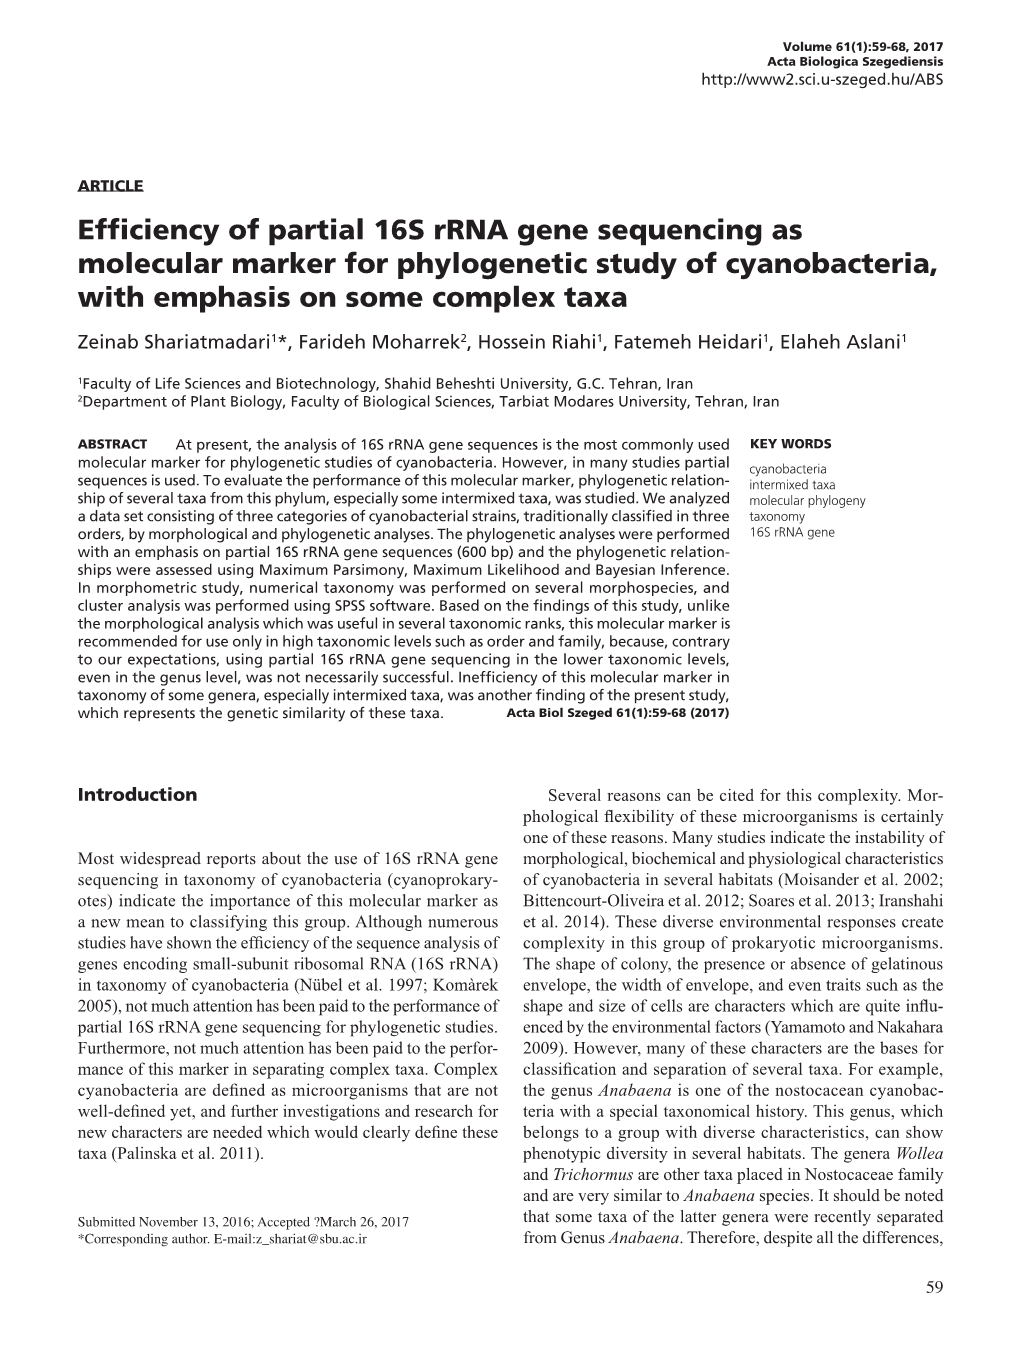 Efficiency of Partial 16S Rrna Gene Sequencing As Molecular Marker for Phylogenetic Study of Cyanobacteria, with Emphasis on Some Complex Taxa